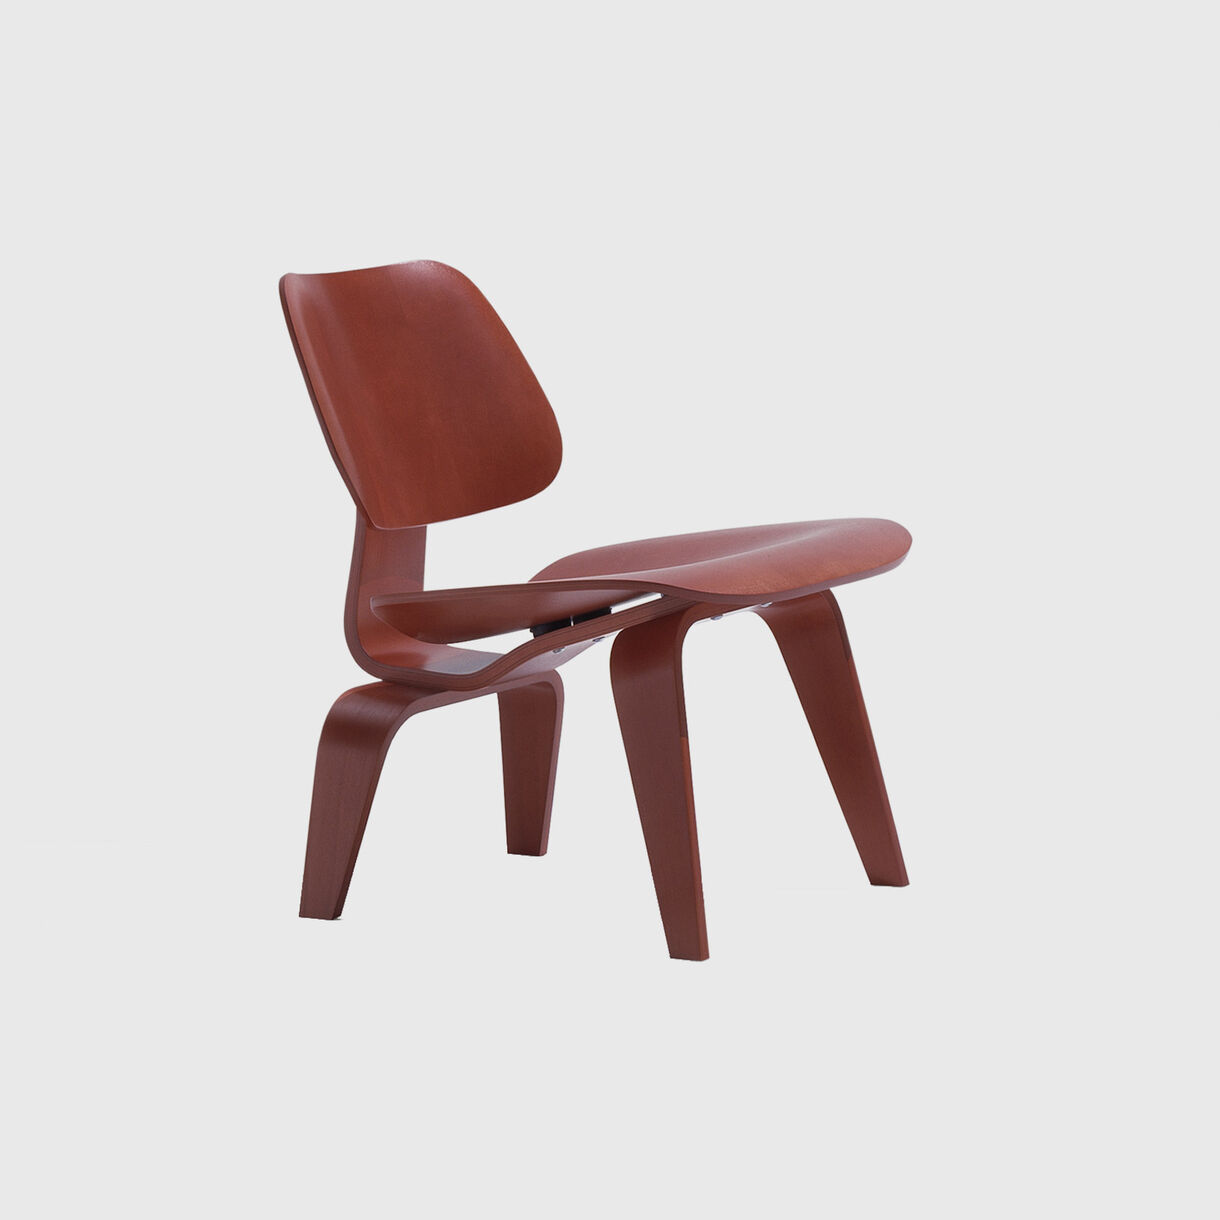 Eames Moulded Plywood Lounge Chair, Wood Base, Red Stain